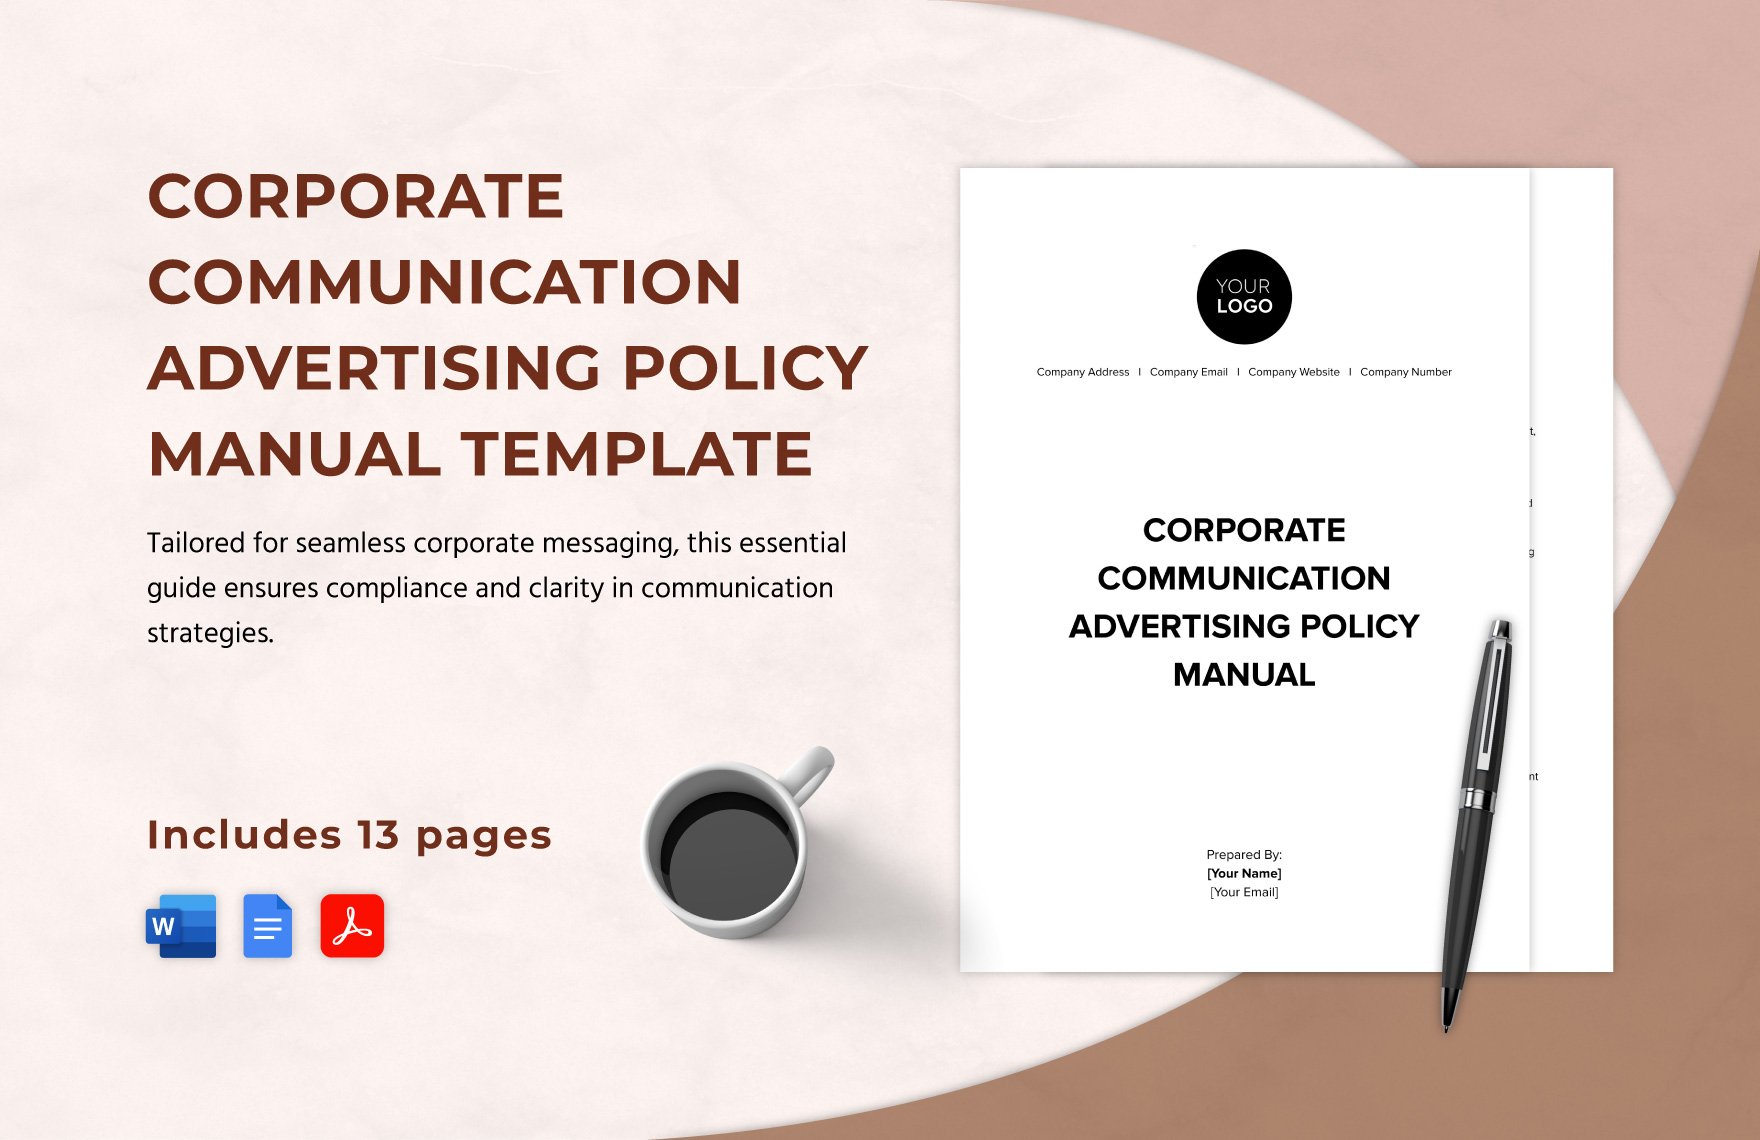 Corporate Communication Advertising Policy Manual Template in Word, Google Docs, PDF